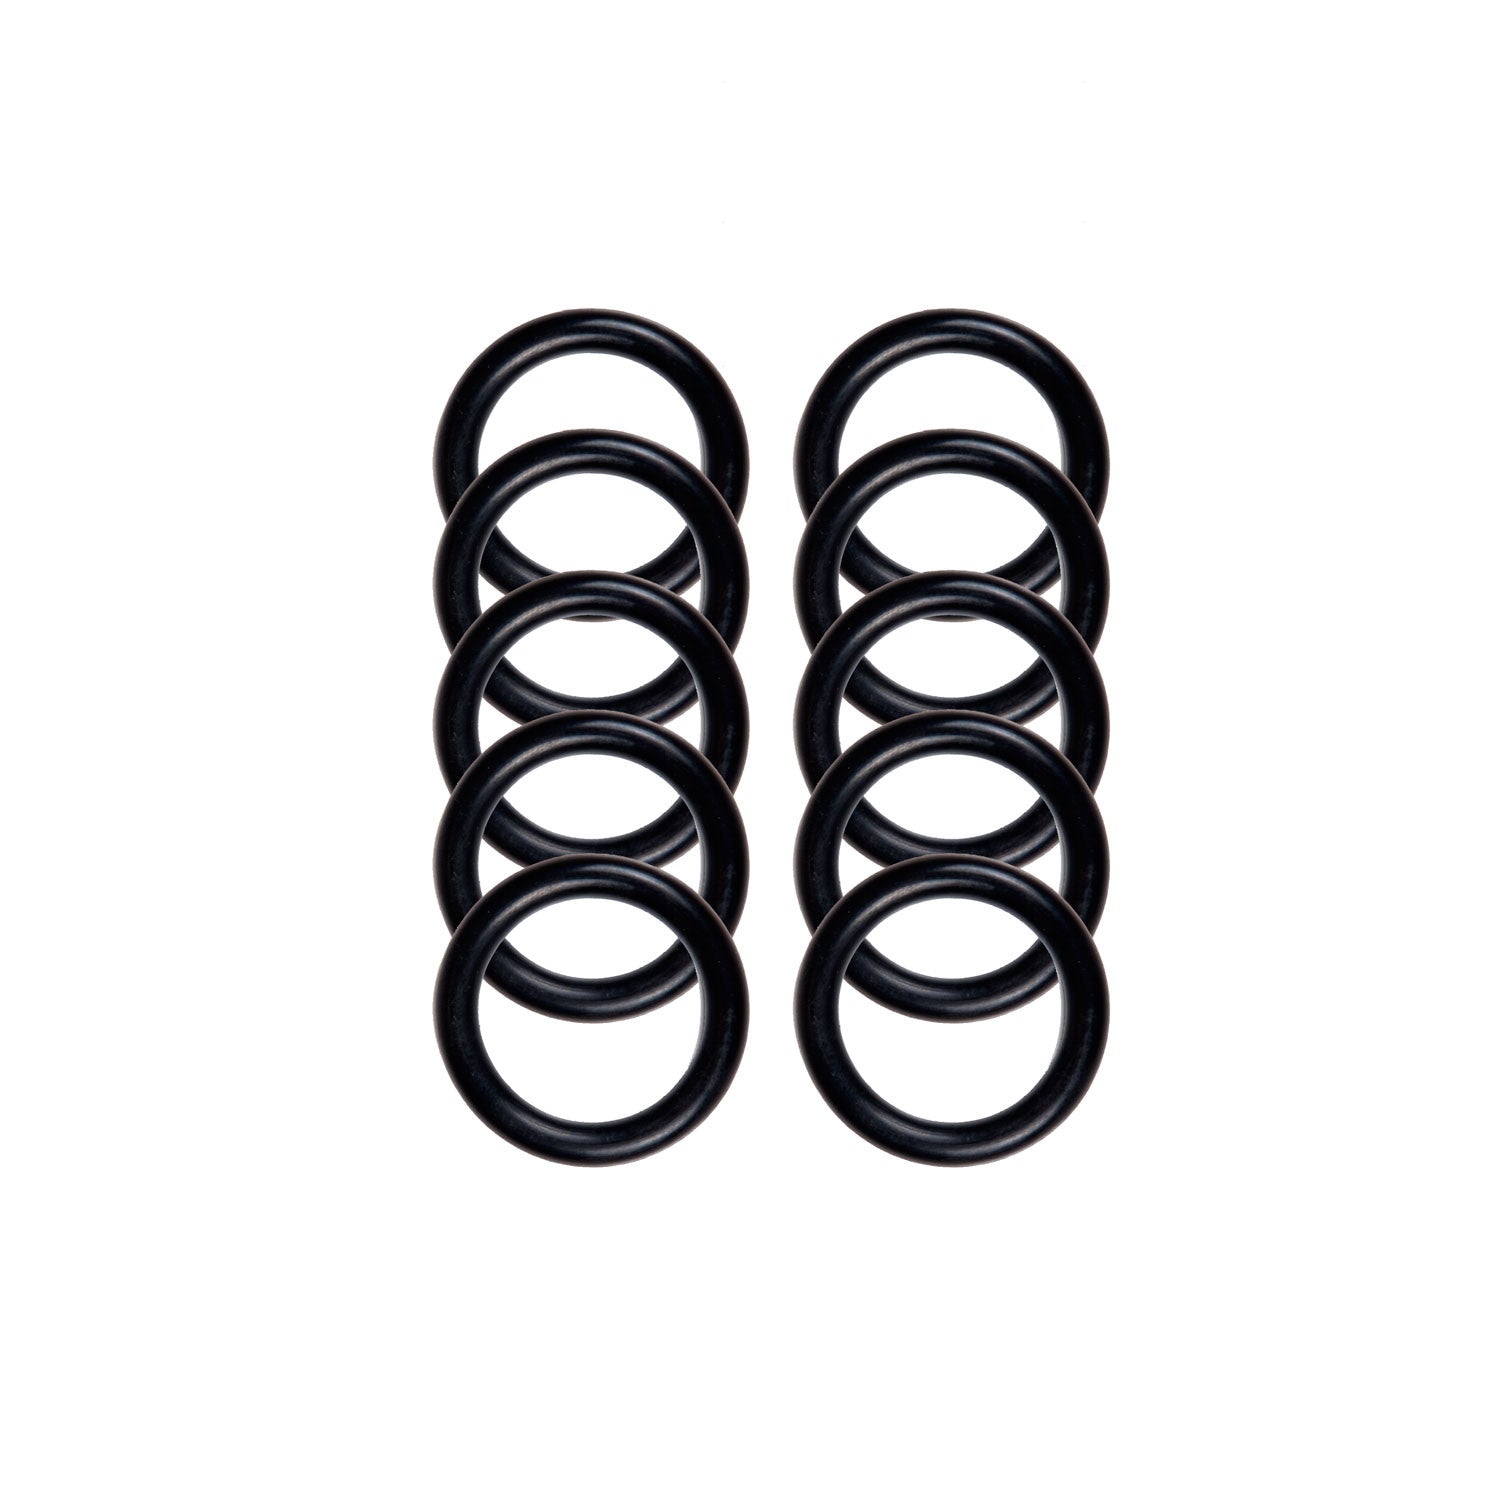 O-Rings for 1 Inch Ball Arm (Set of 10)